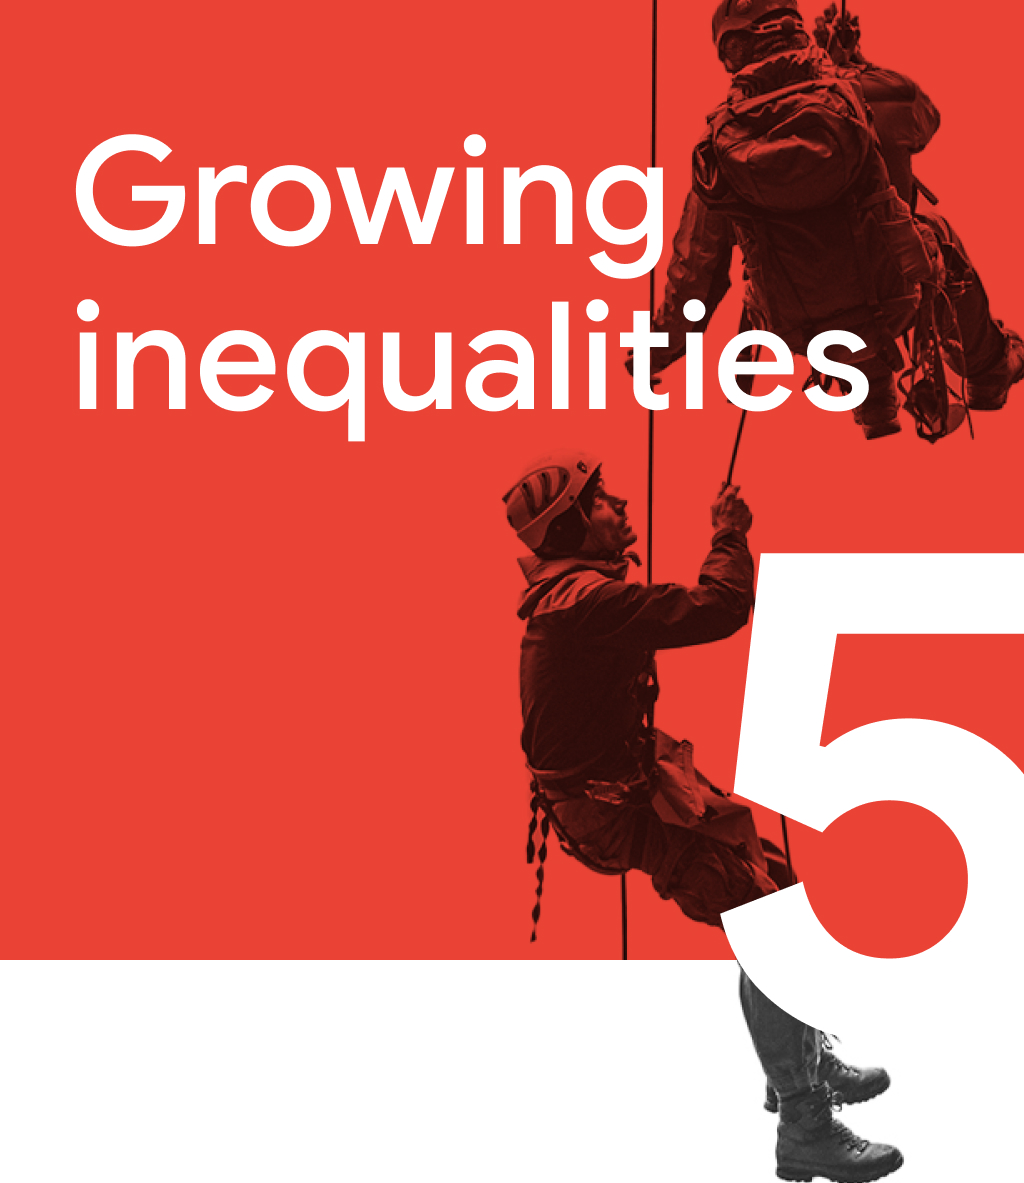 Trend 5: Growing inequalities. Two people helping one another rappel down from a height, representing the inequalities exacerbated by the pandemic that people have to overcome